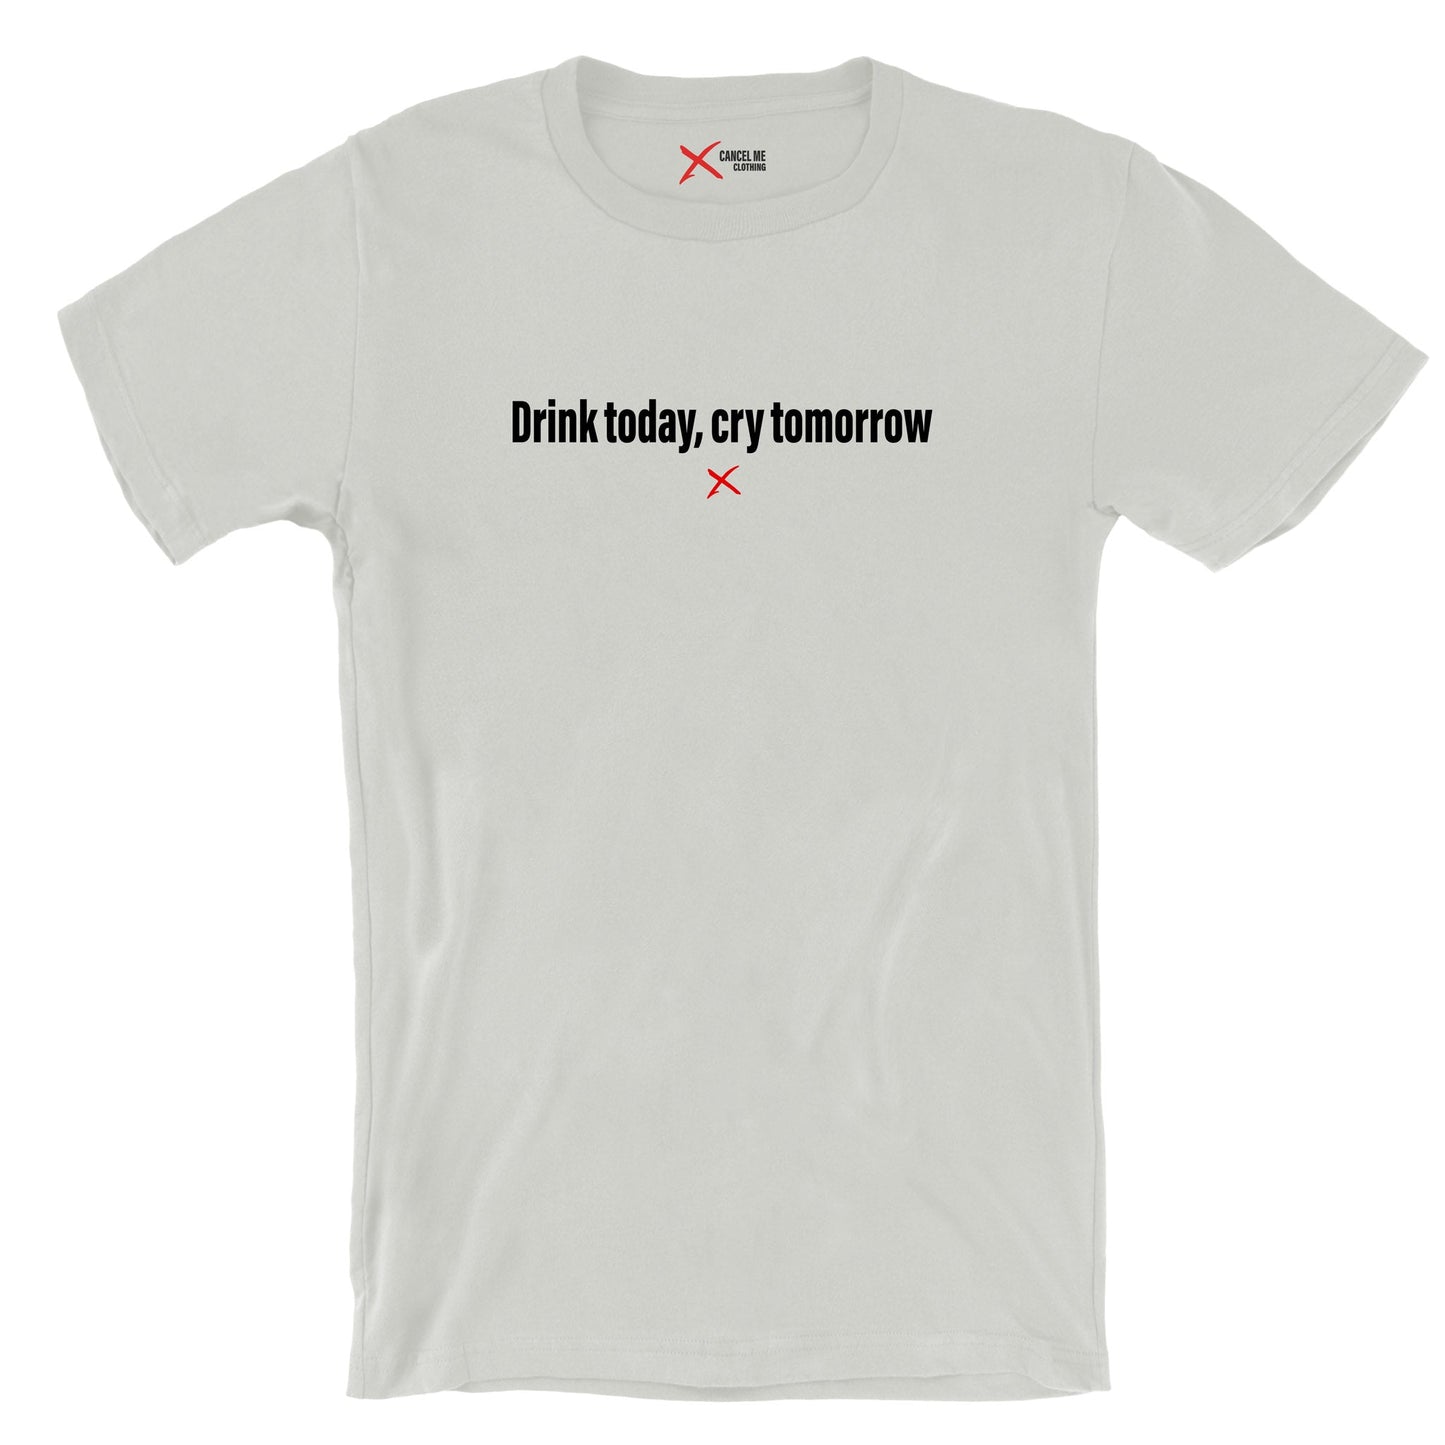 Drink today, cry tomorrow - Shirt